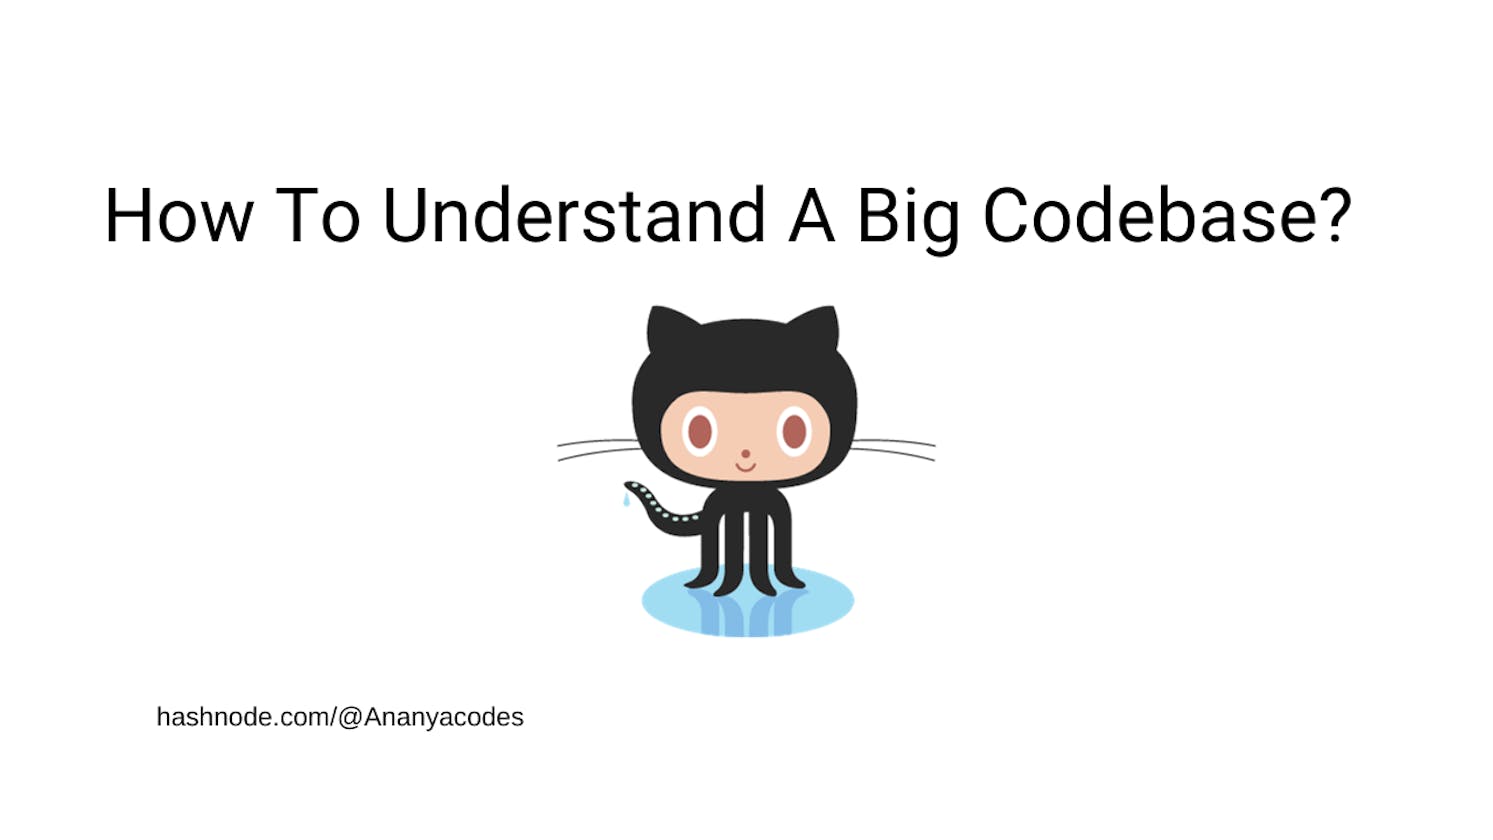 How To Understand A Big Codebase?